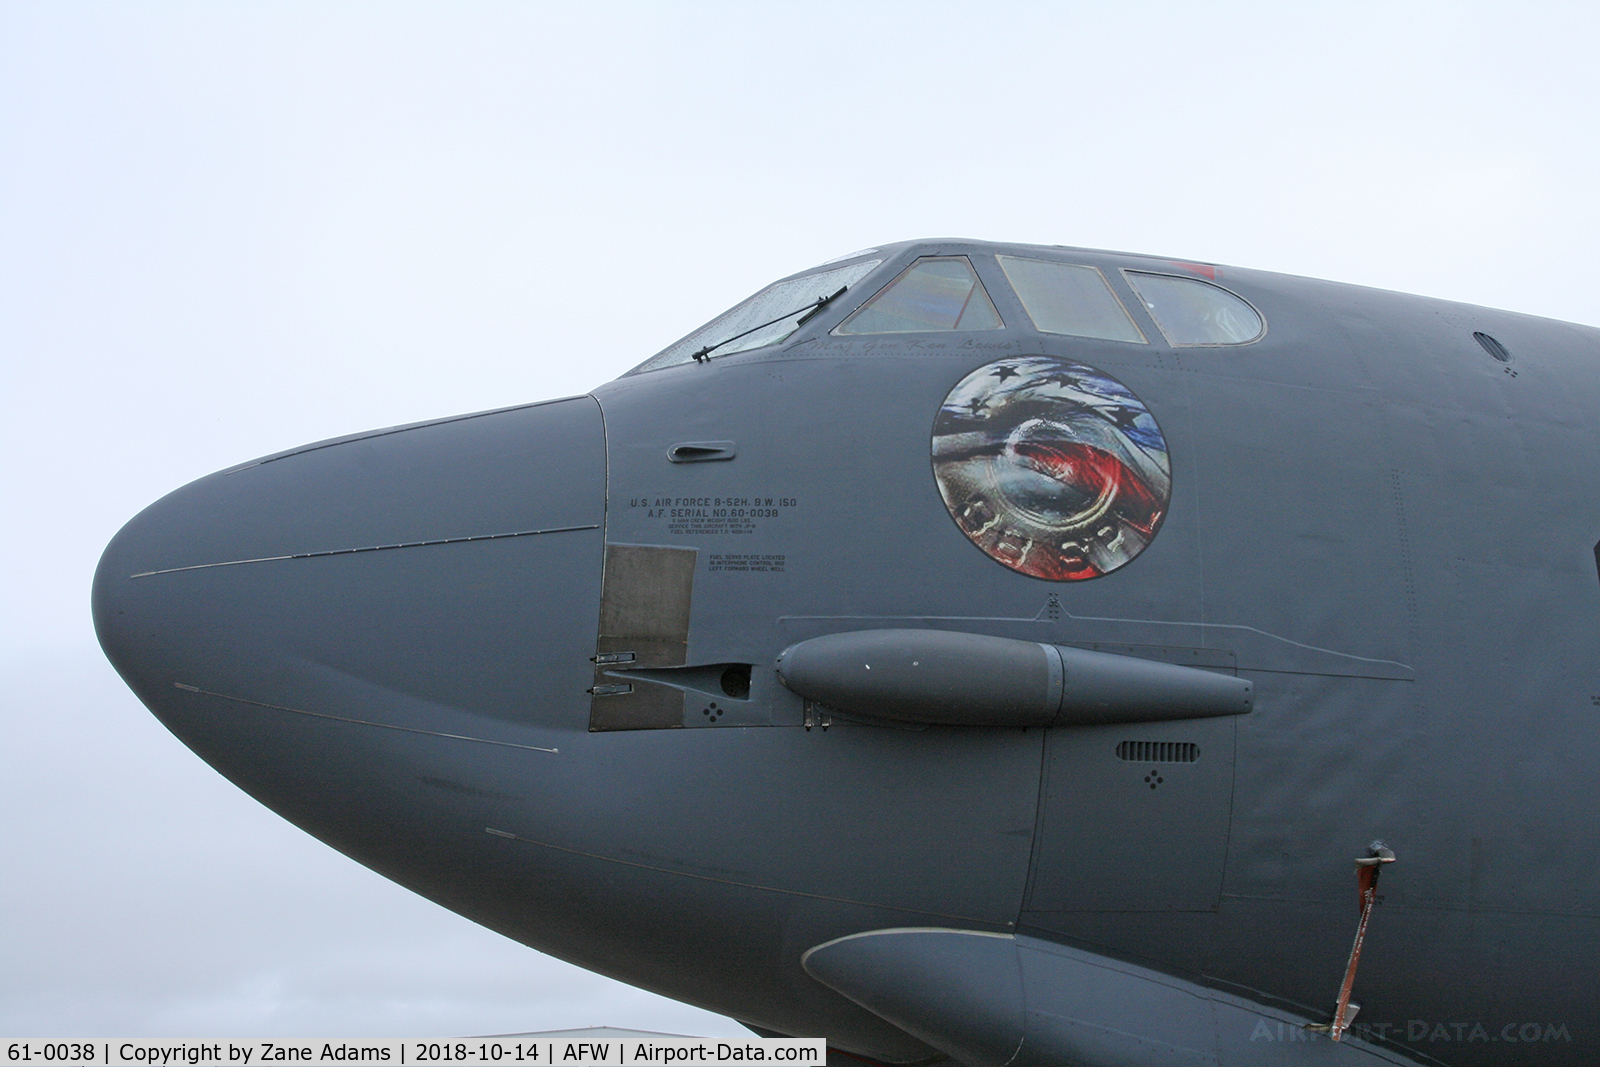 61-0038, 1961 Boeing B-52H Stratofortress C/N 464465, At the 2018 Alliance Airshow - Fort Worth, Texas